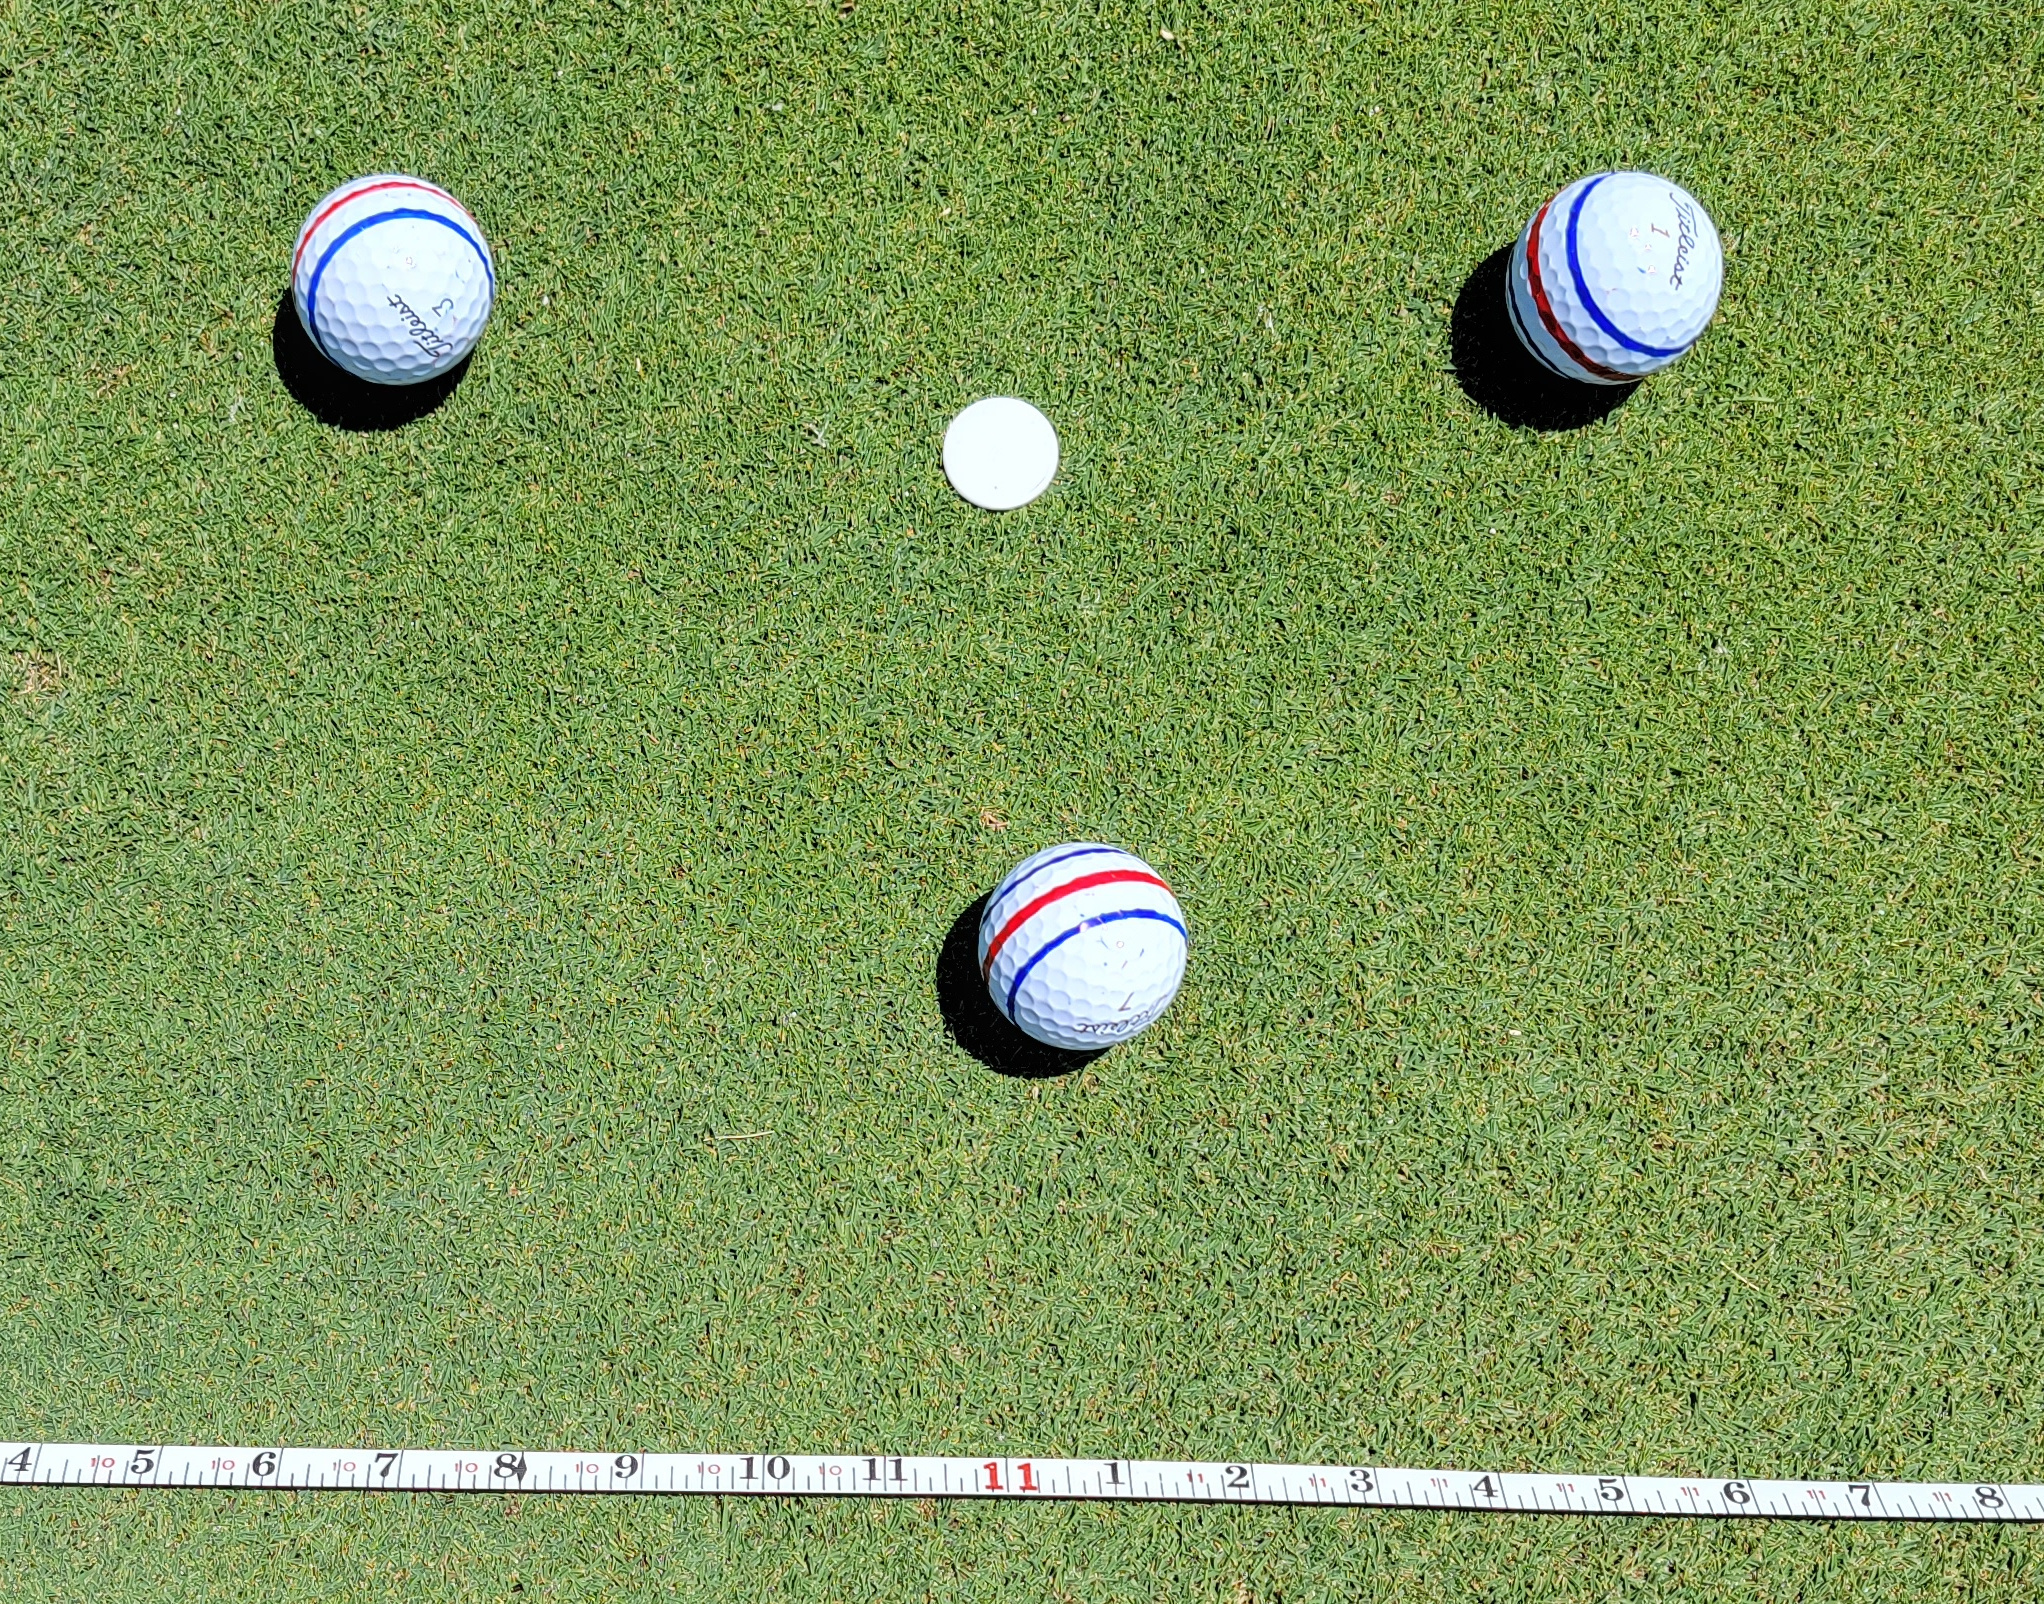 Old Duffer Golf image of how to measure the stimp reading on a green